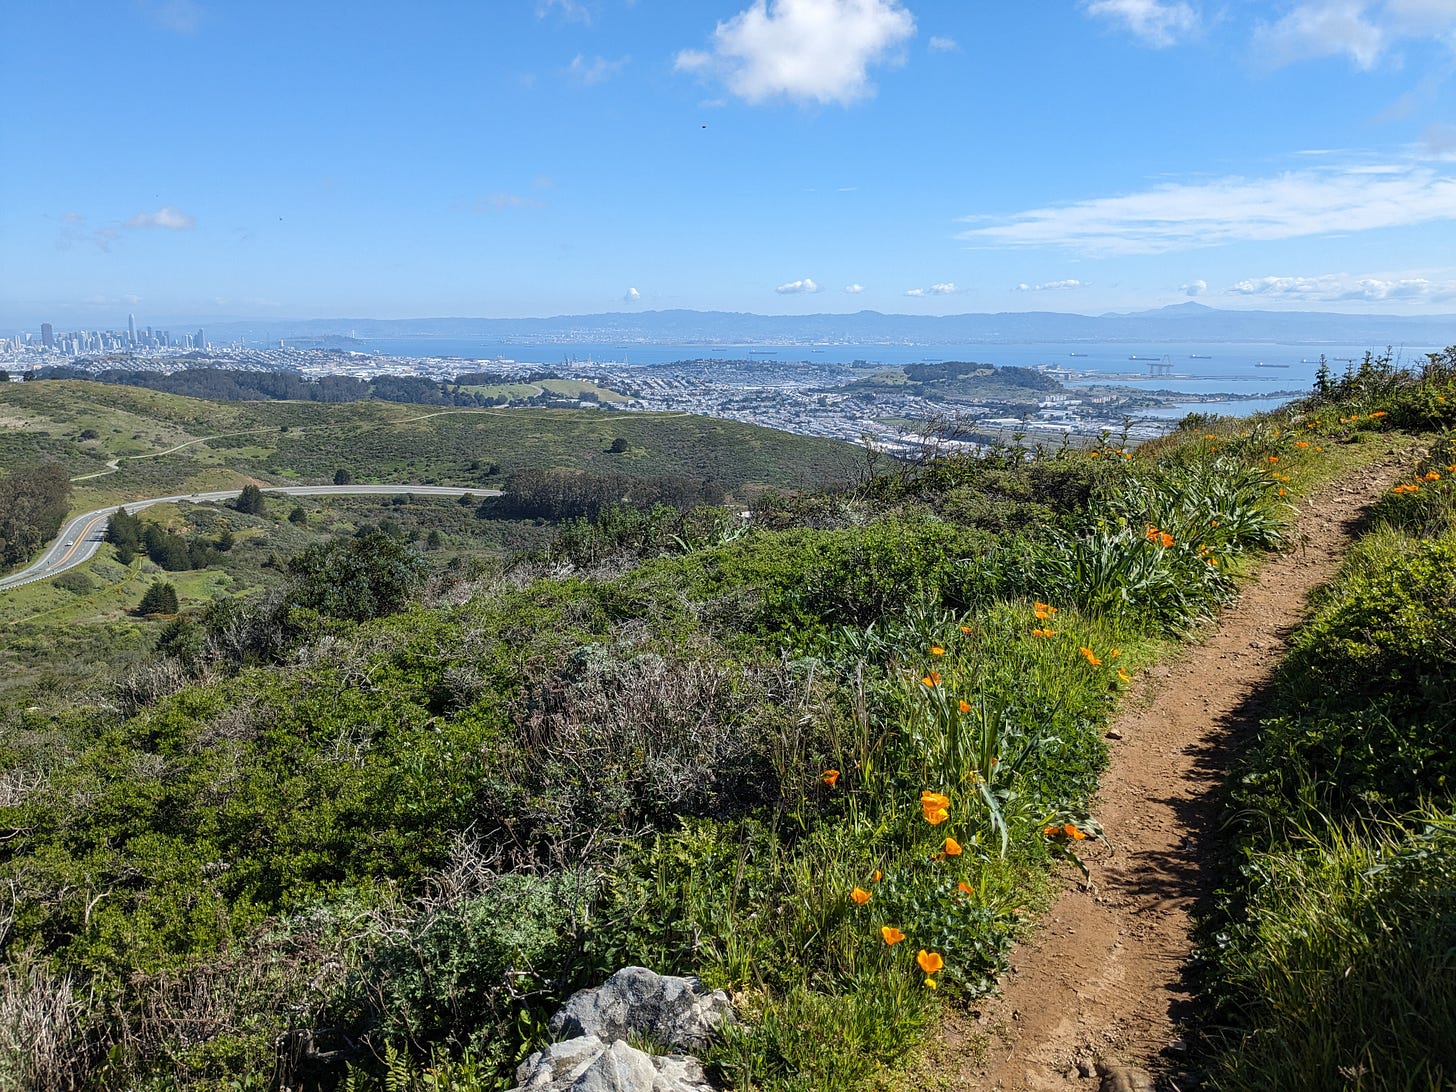 Sweeping view of San Francisco downtown in distance, Bay in background, green hills and wildflowers next to a dirt trail in foreground